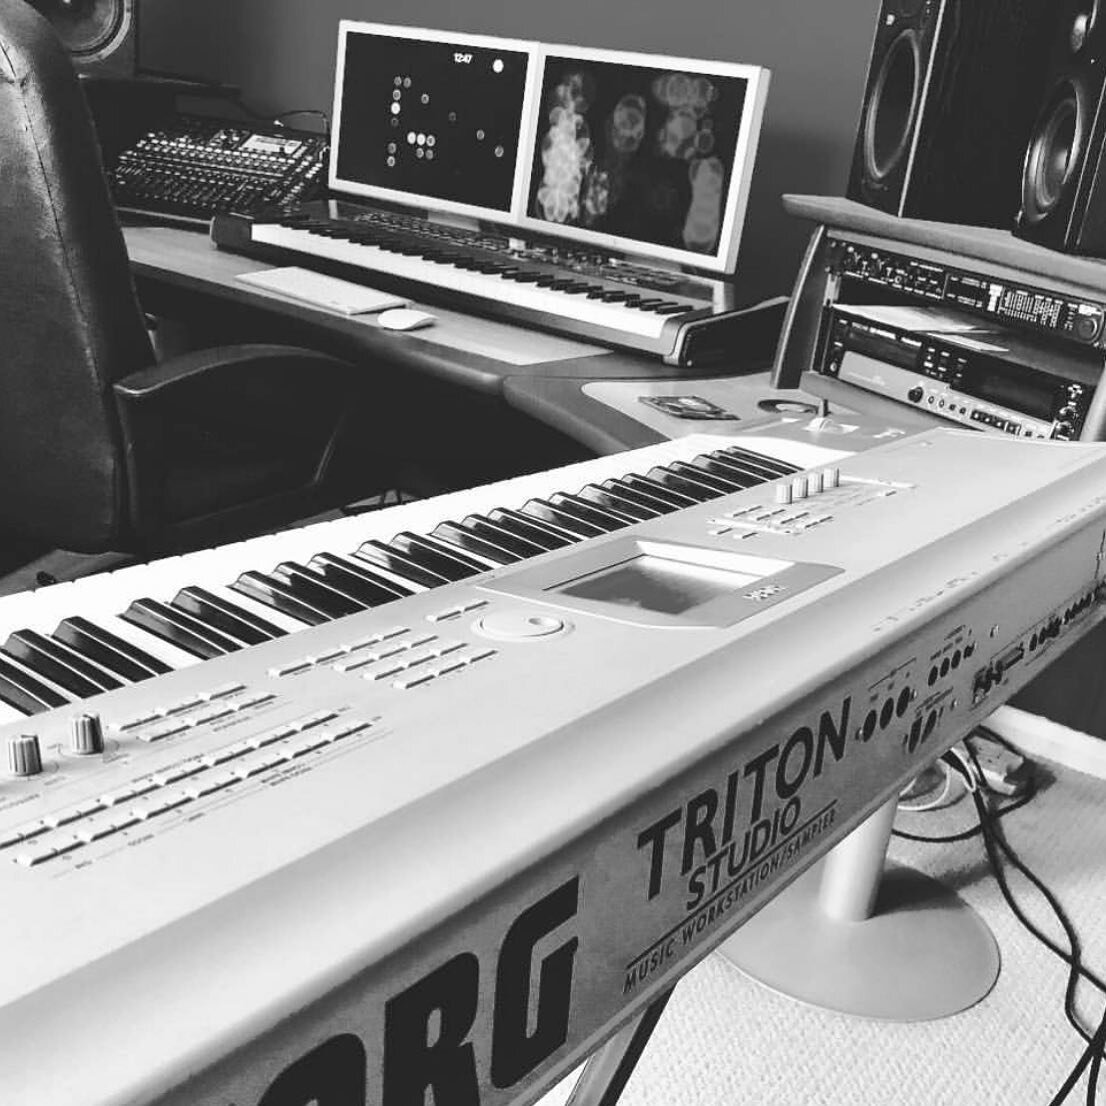 When only the Korg Triton will do 💪🏼 Let the Friday fun commence! #radioads #jingles #studio #korg #oldskool